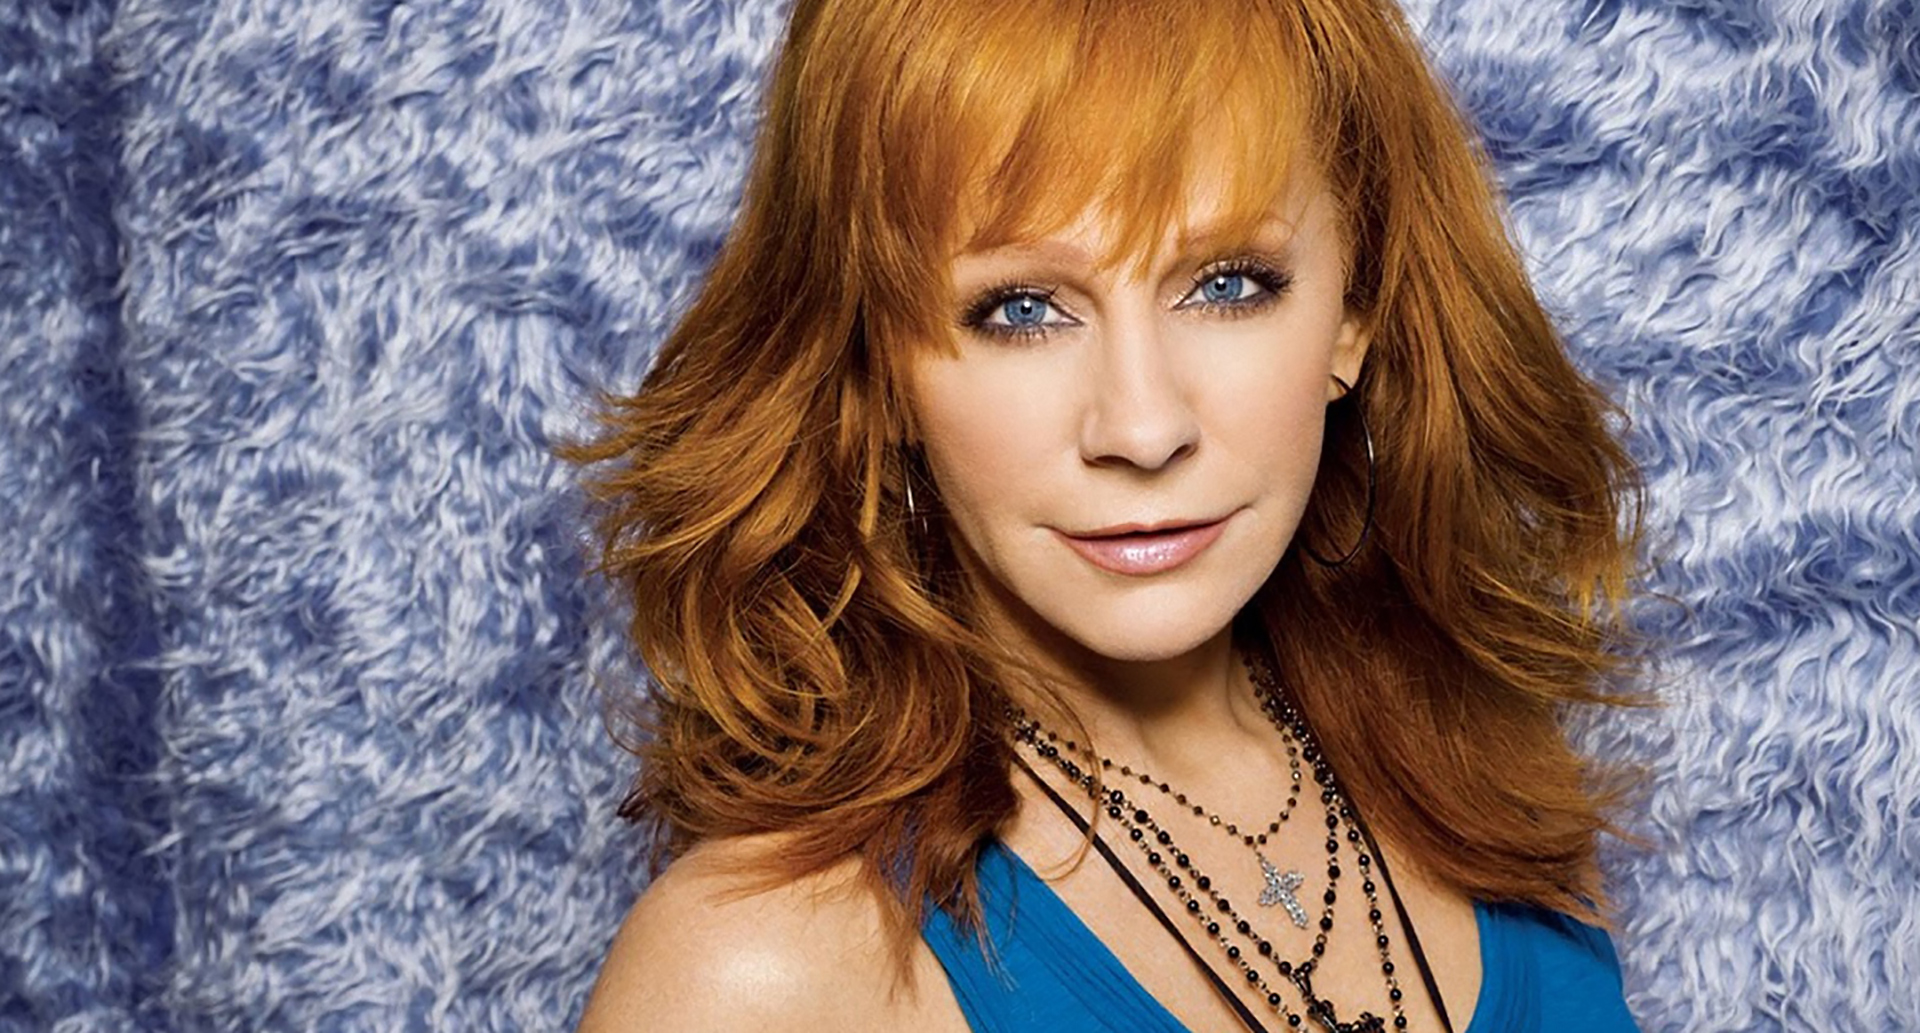 Reba Nell McEntire was born on March 28, 1955, in McAlester, Oklahoma, to a...